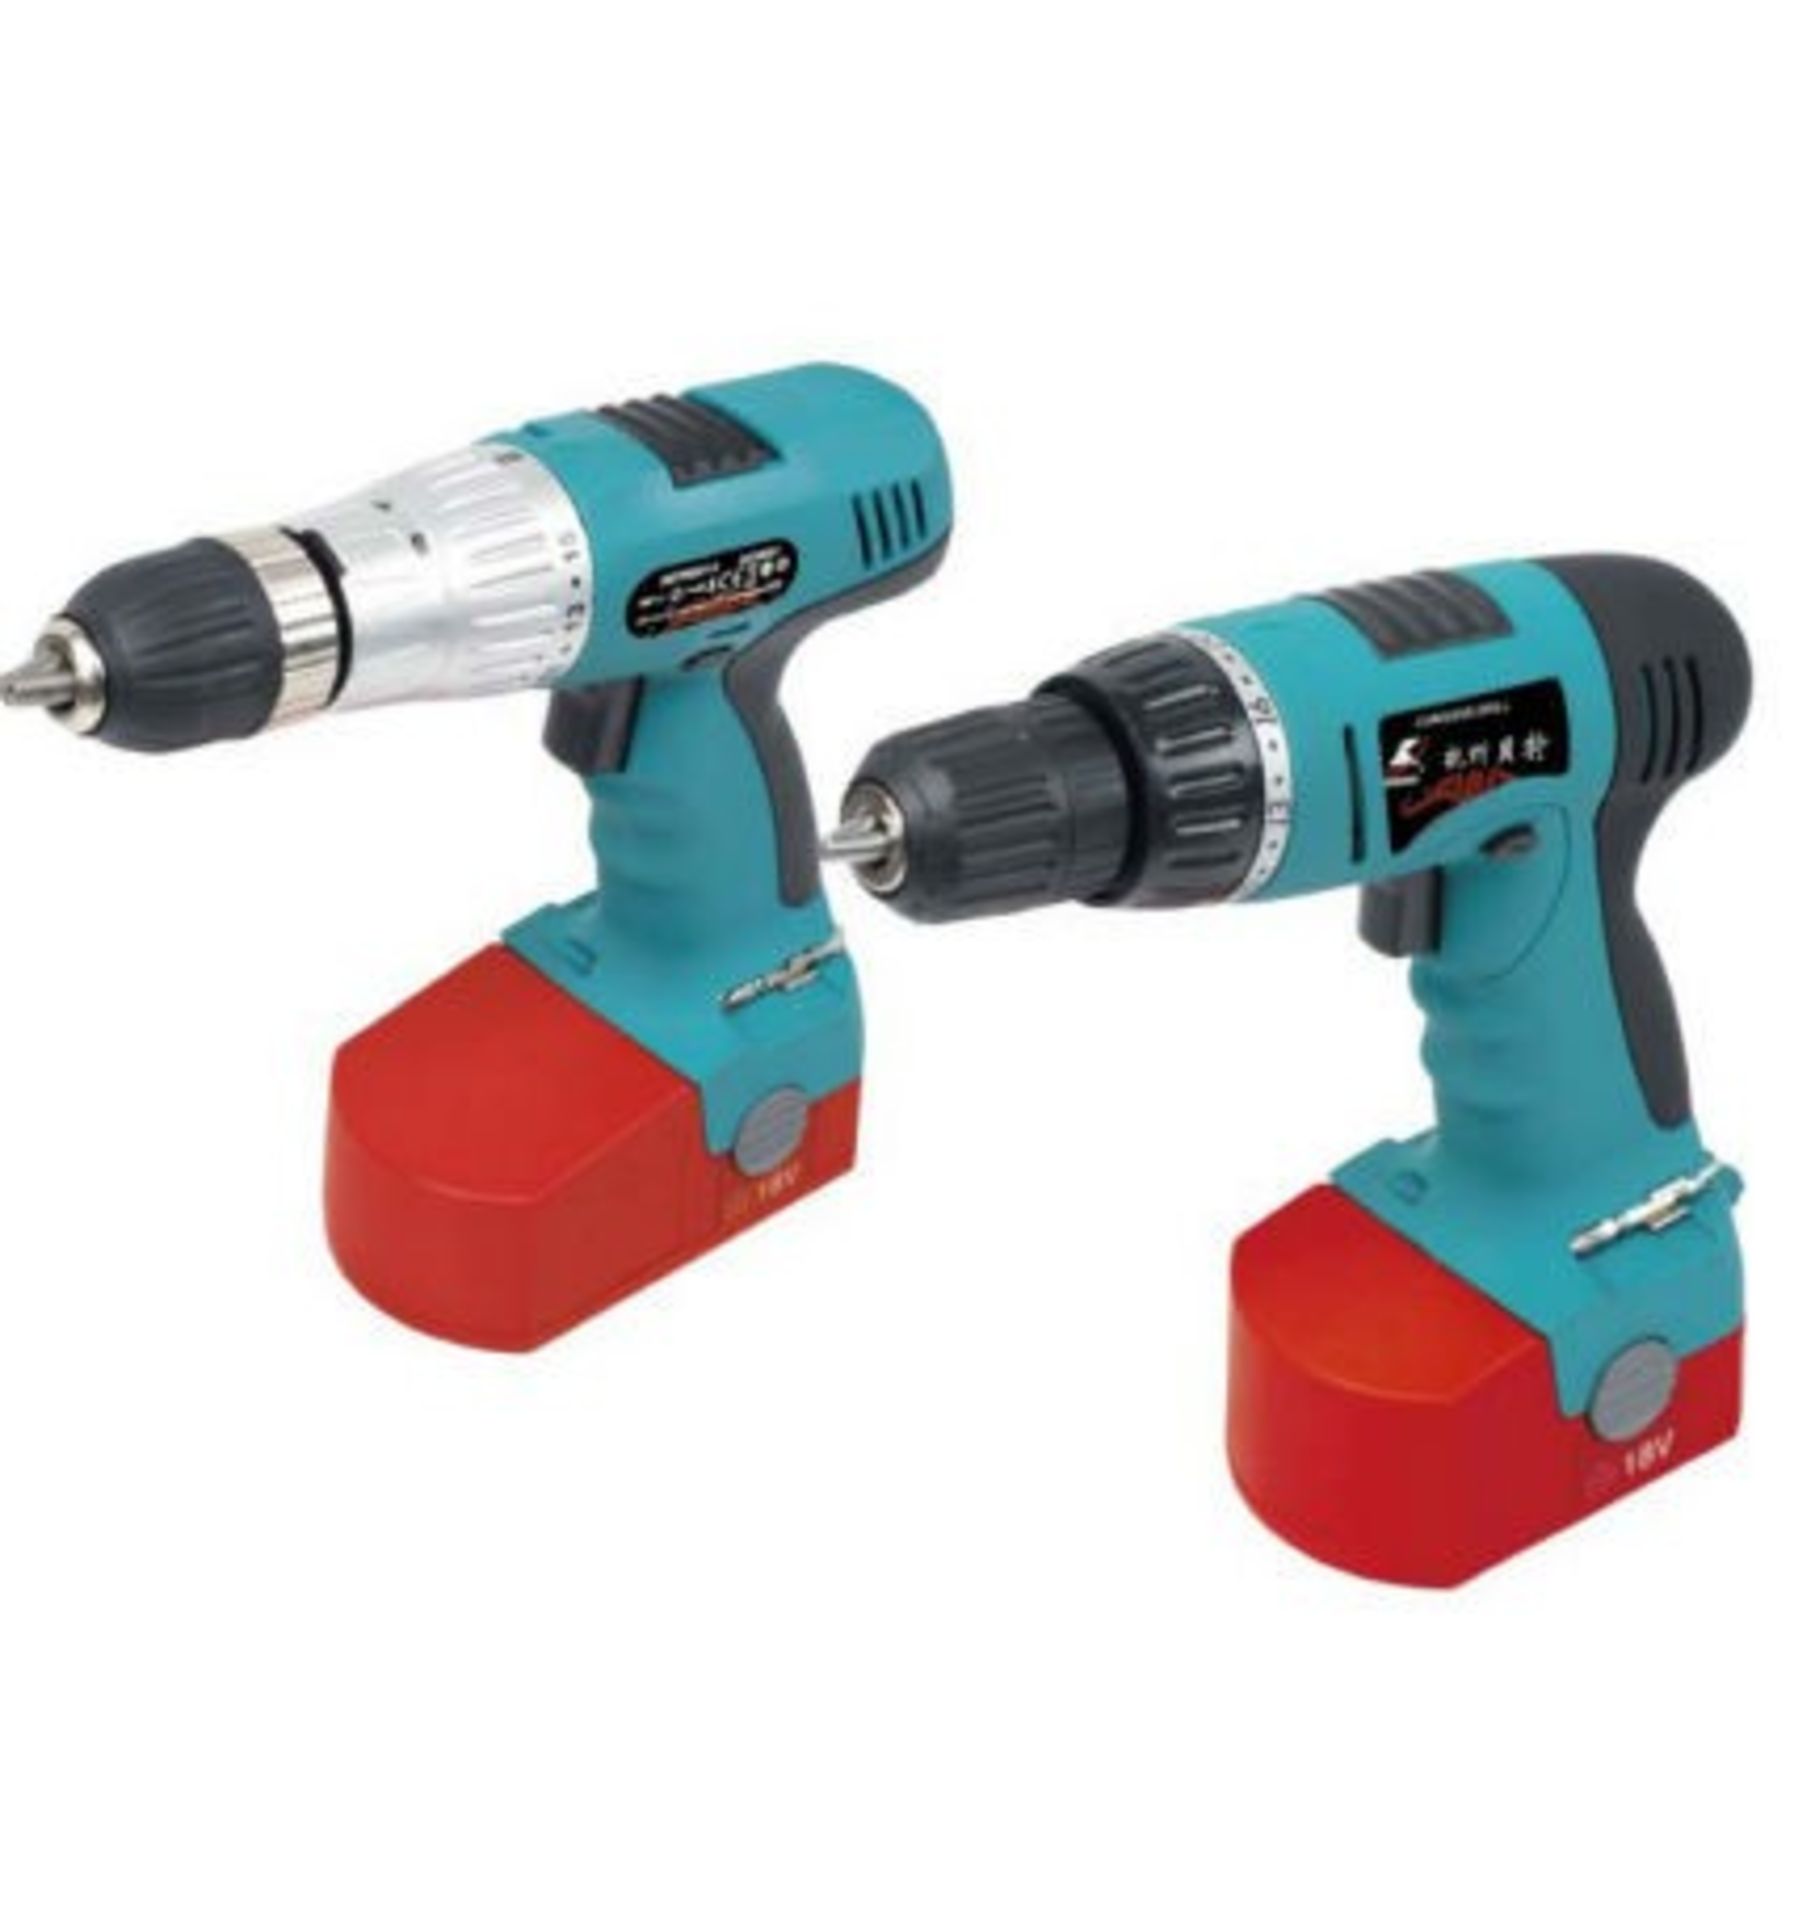 + VAT Brand New 18V Twin Drill Kit with Hammer Action and Torque Adjustment - with 15 Asssorted